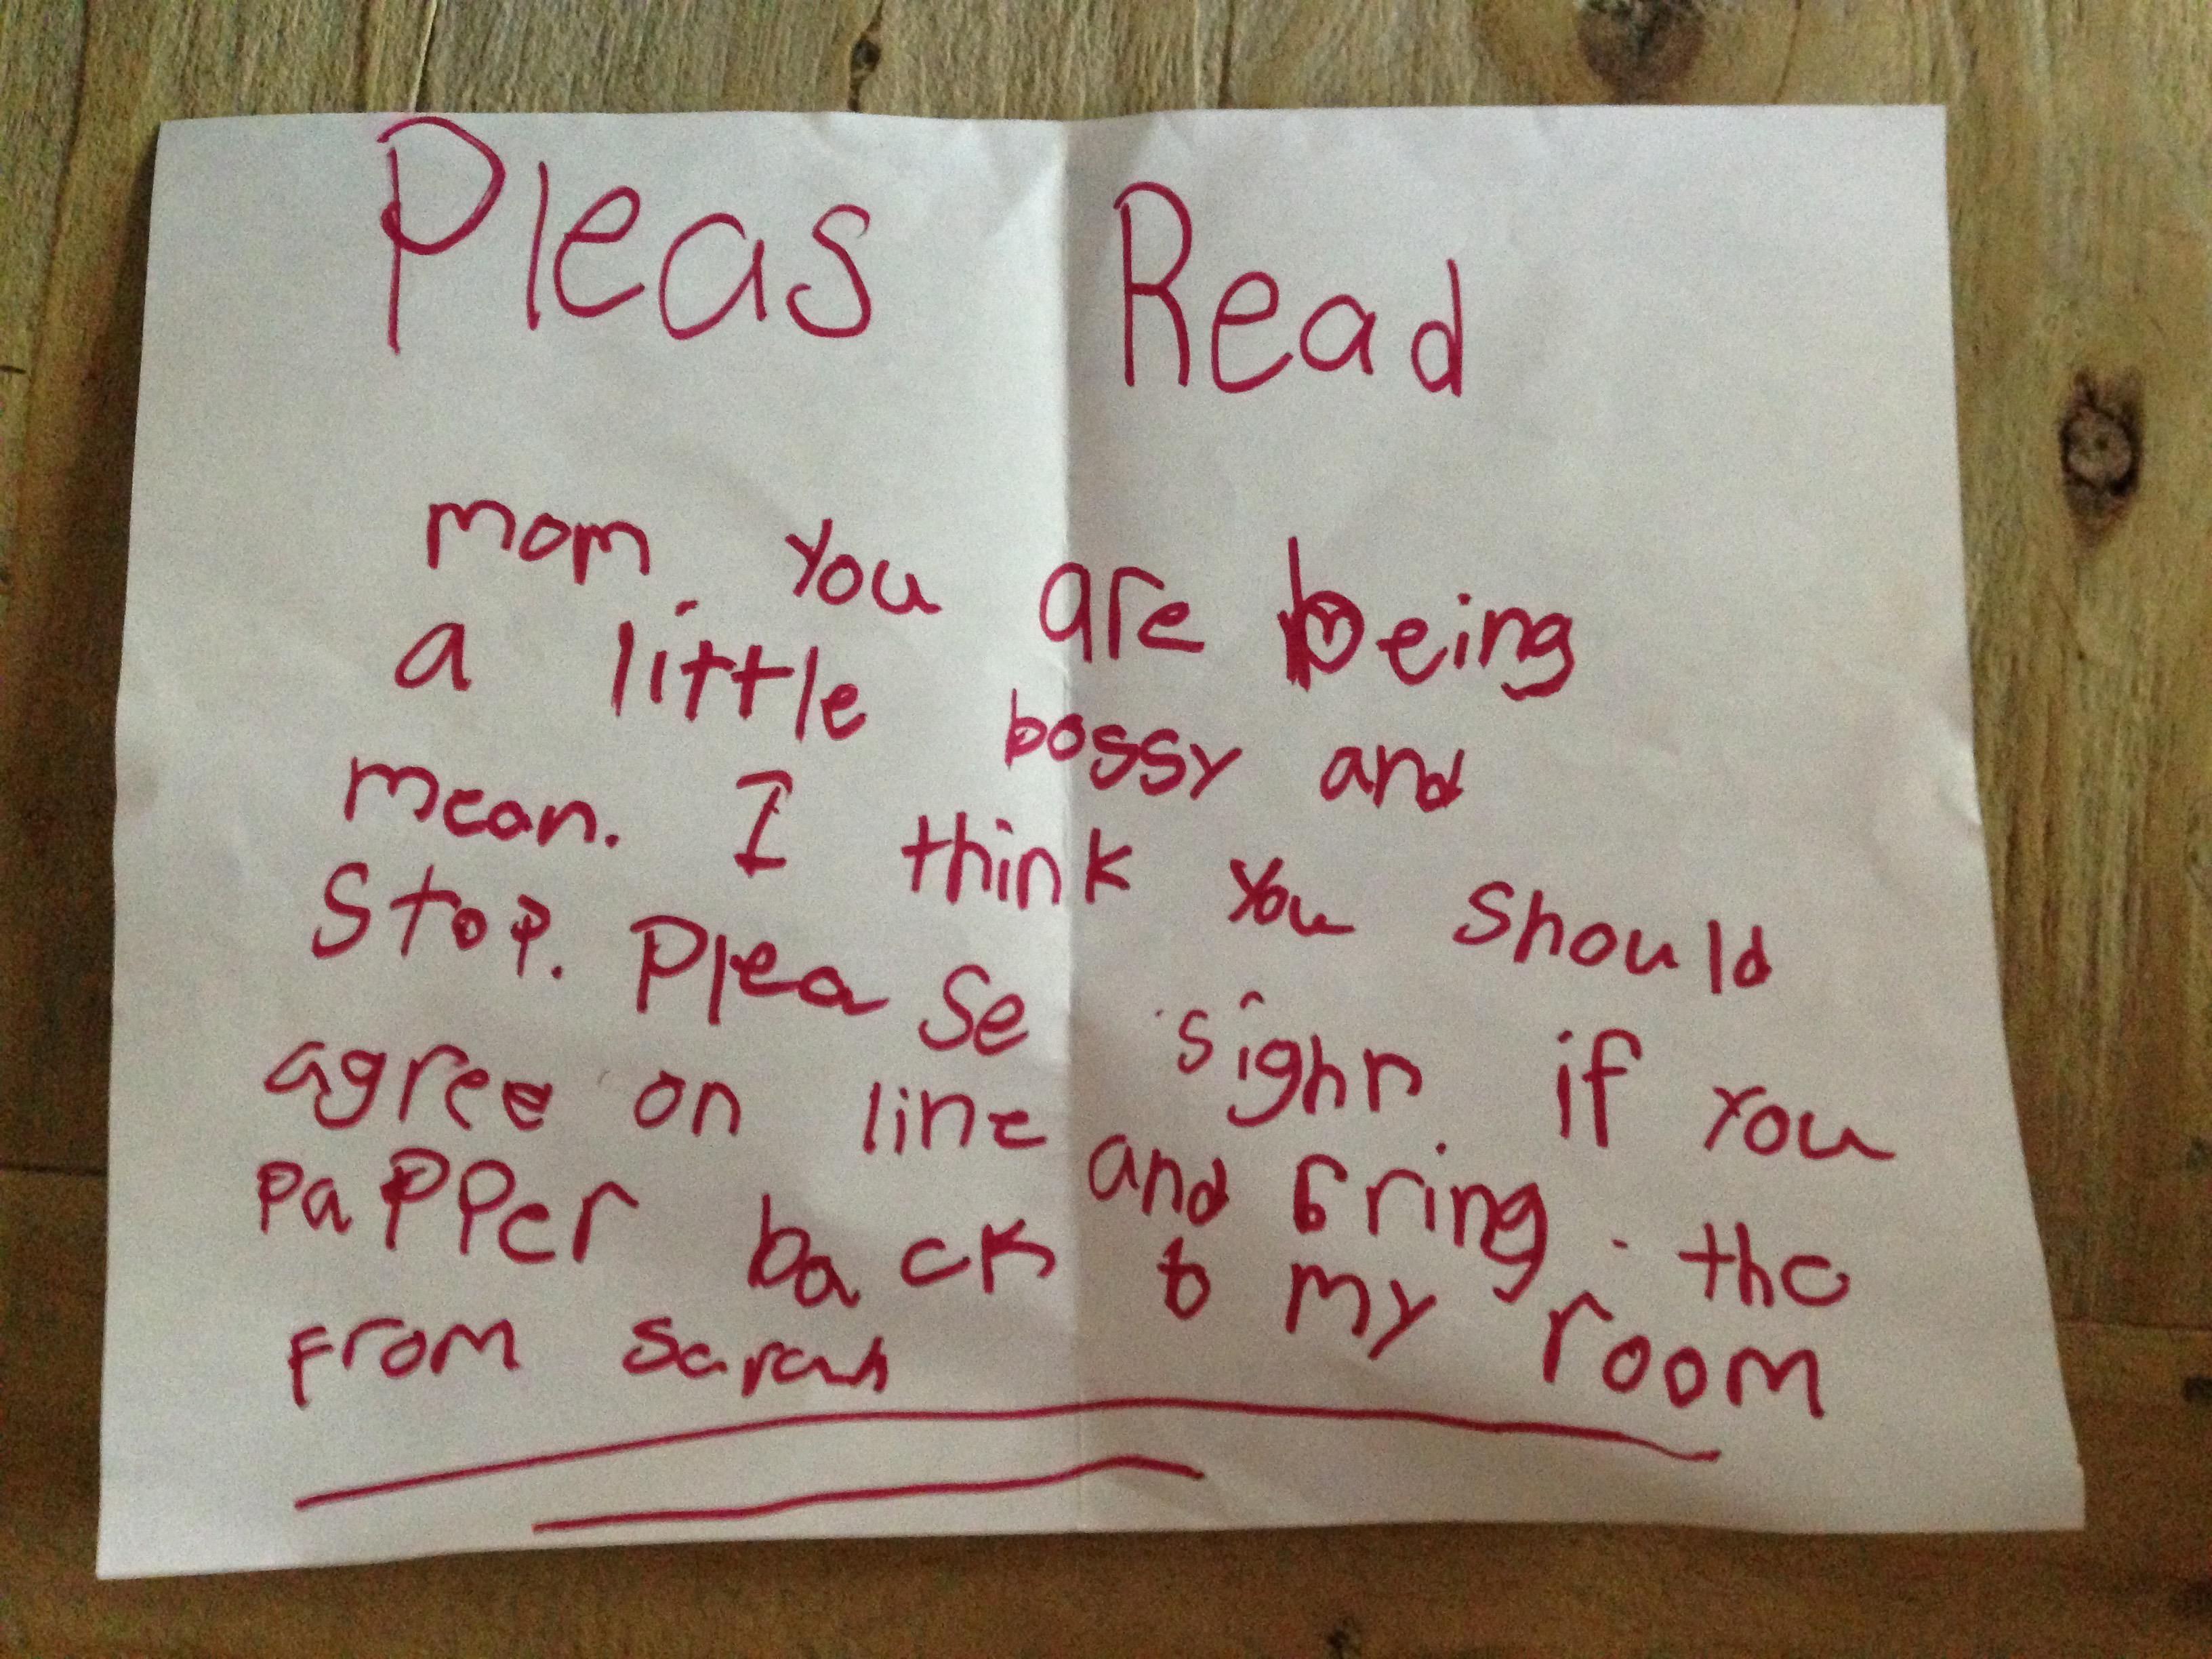 Found this thoughtful letter I wrote to my mom at age 7.